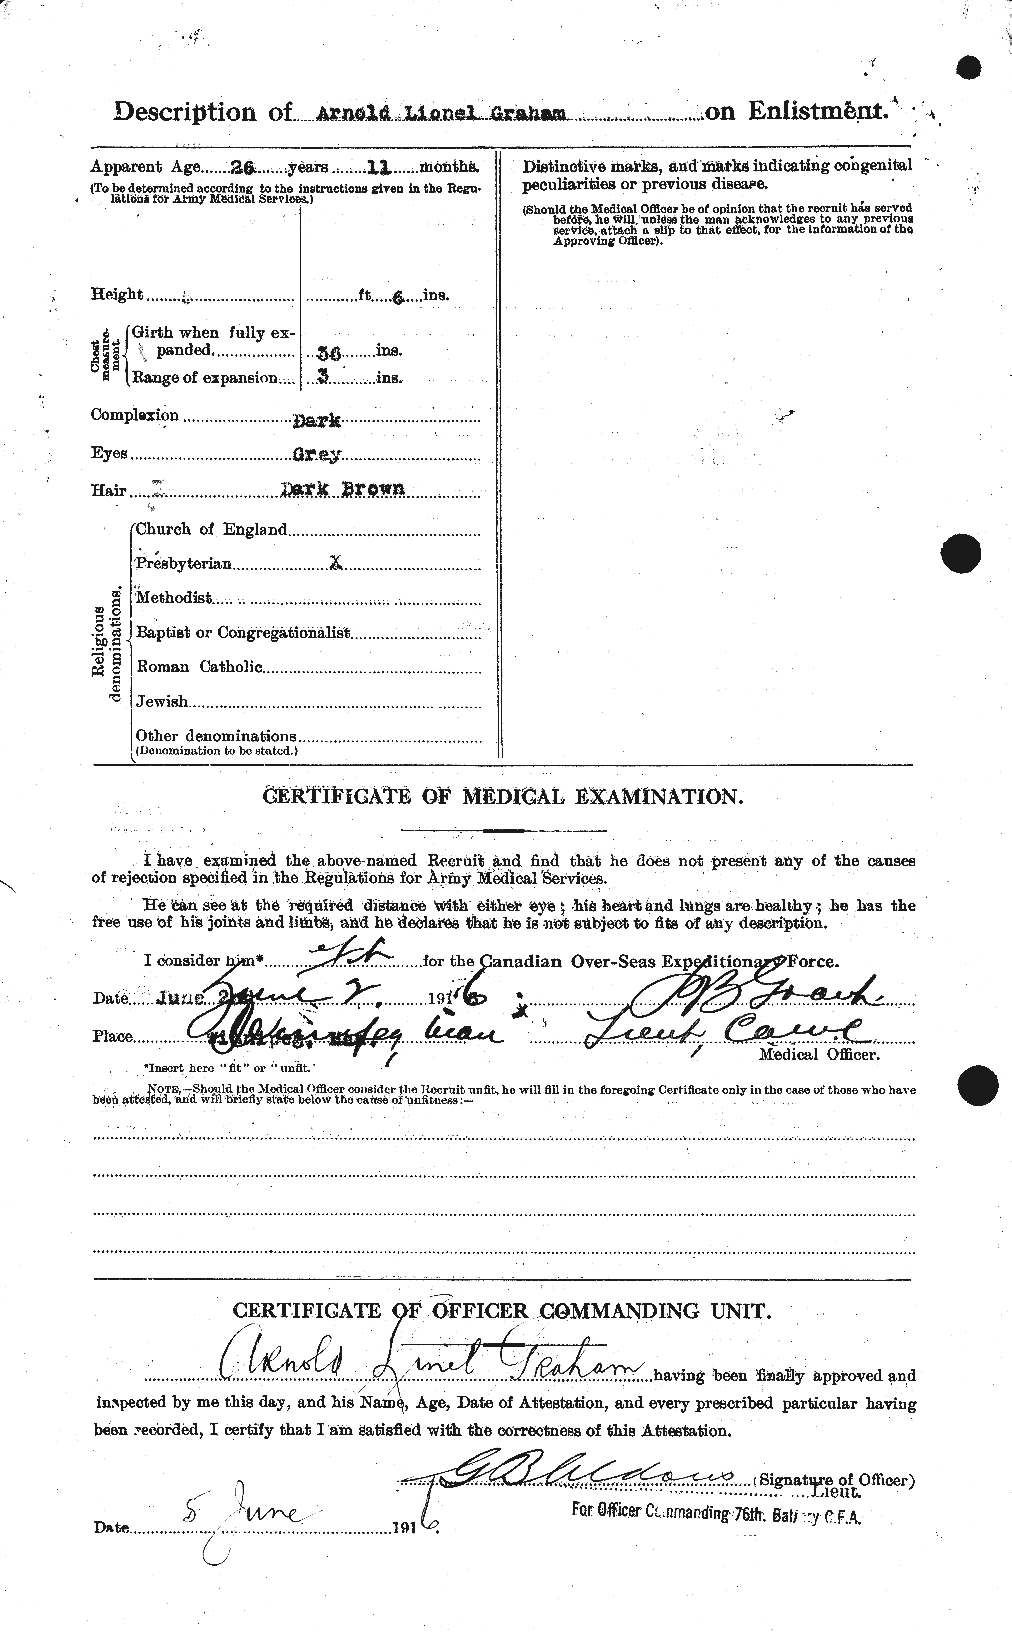 Personnel Records of the First World War - CEF 359648b